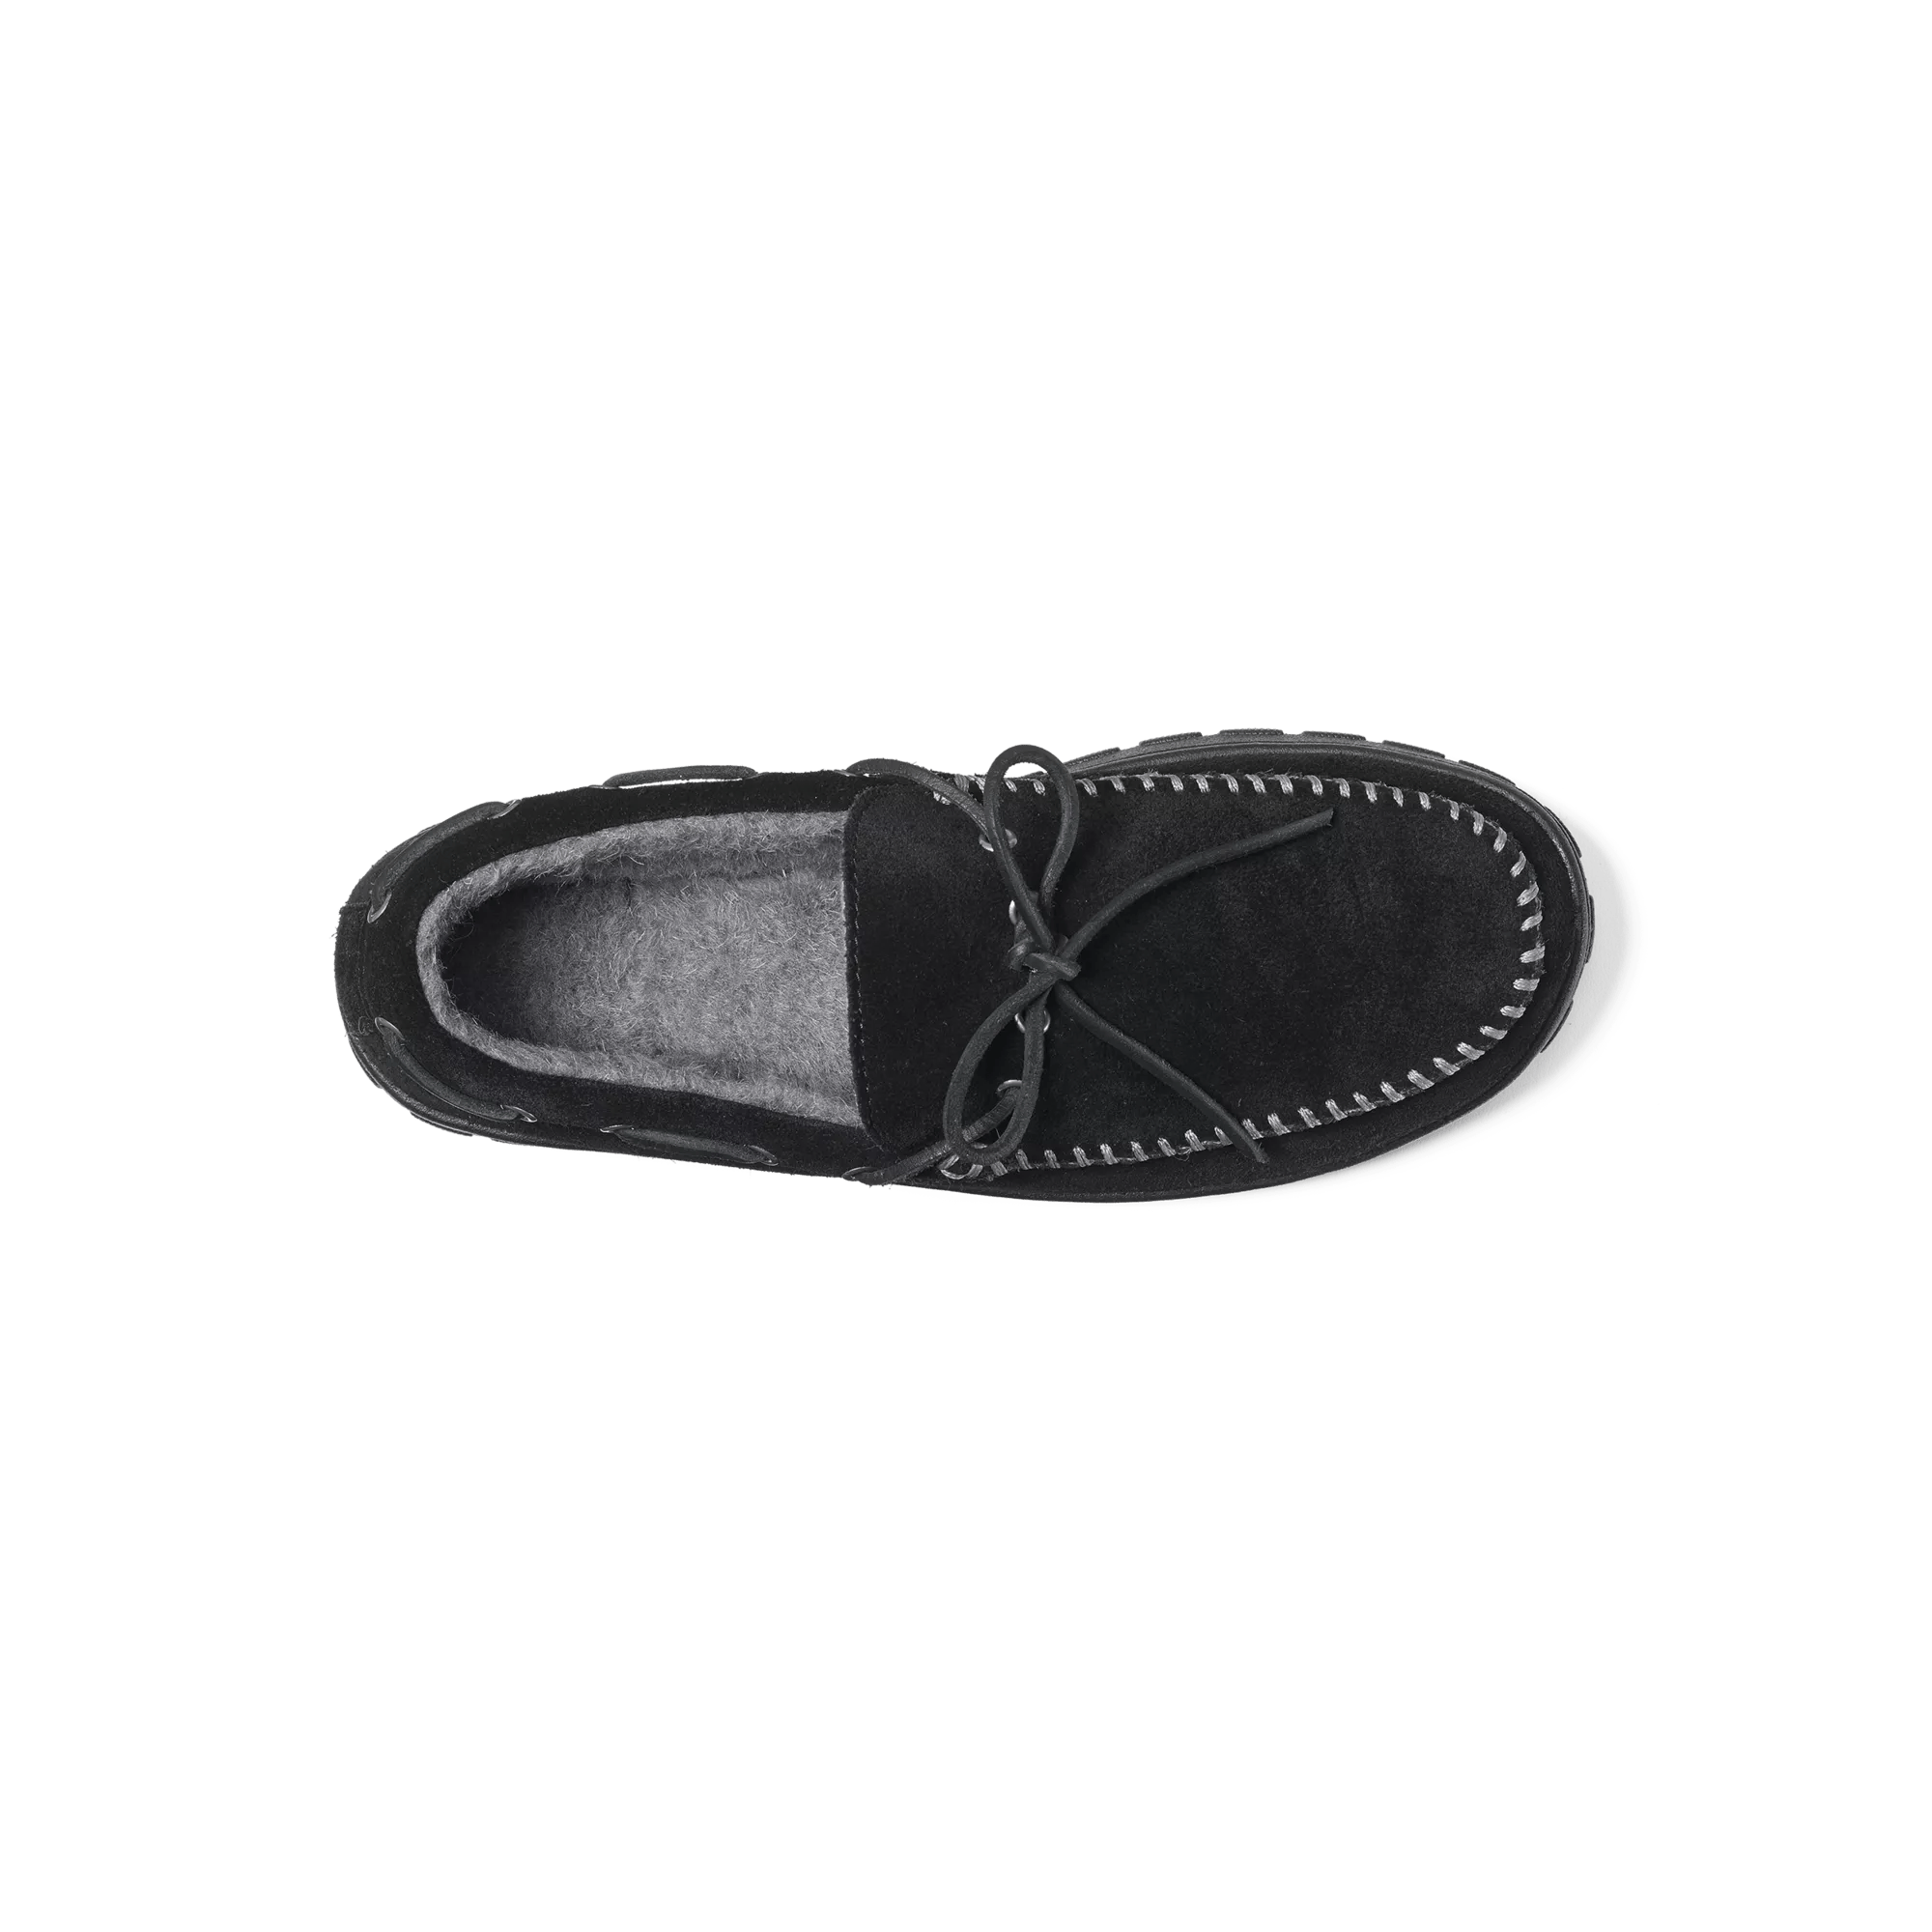 Shearling-Lined Moccasin Slippers